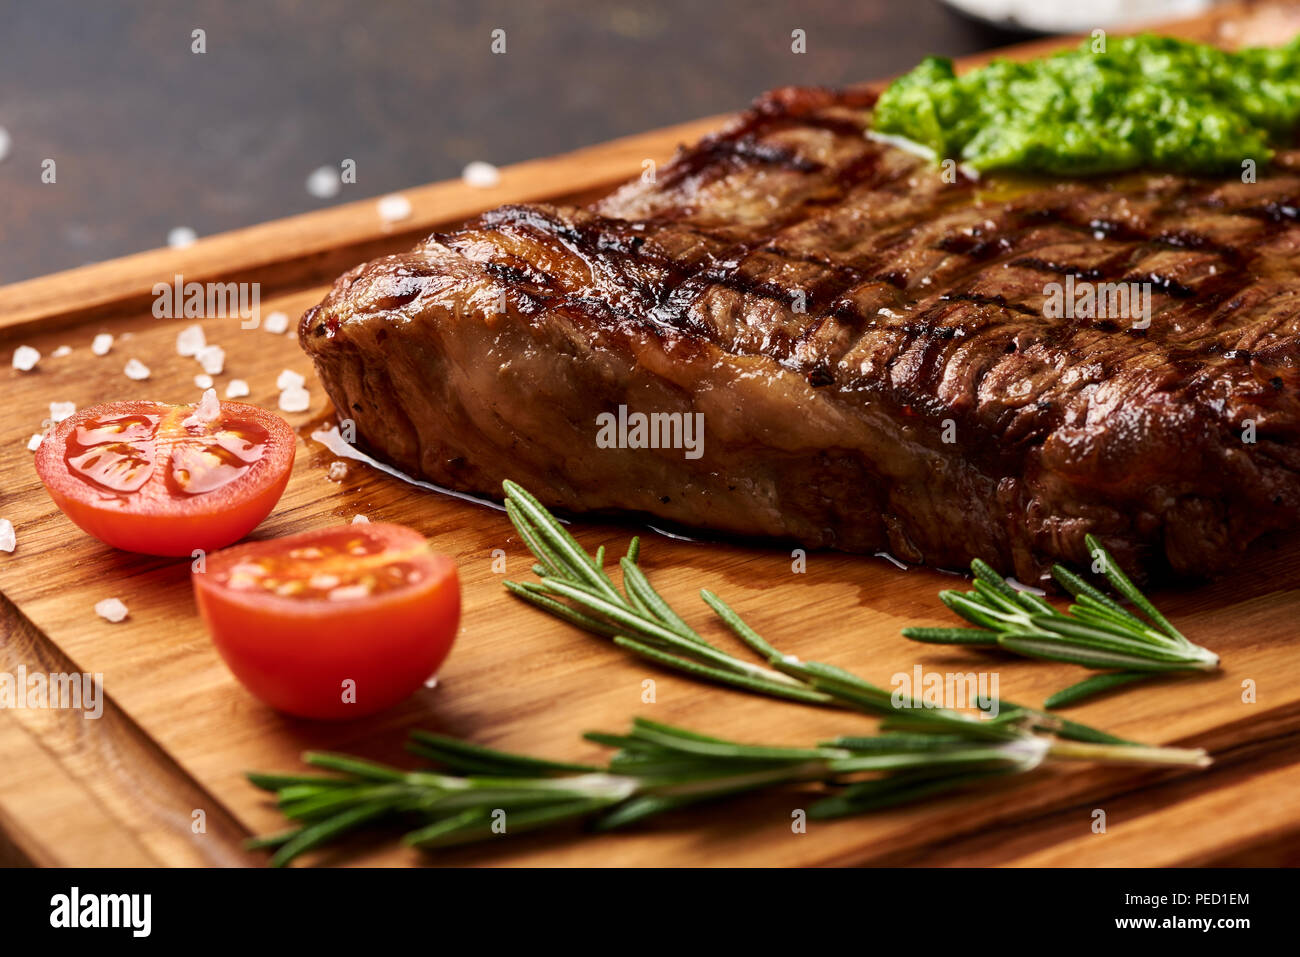 Grilled Black Angus Steak with tomatoes, garlic with chimichurri sauce on meat cutting board. Stock Photo